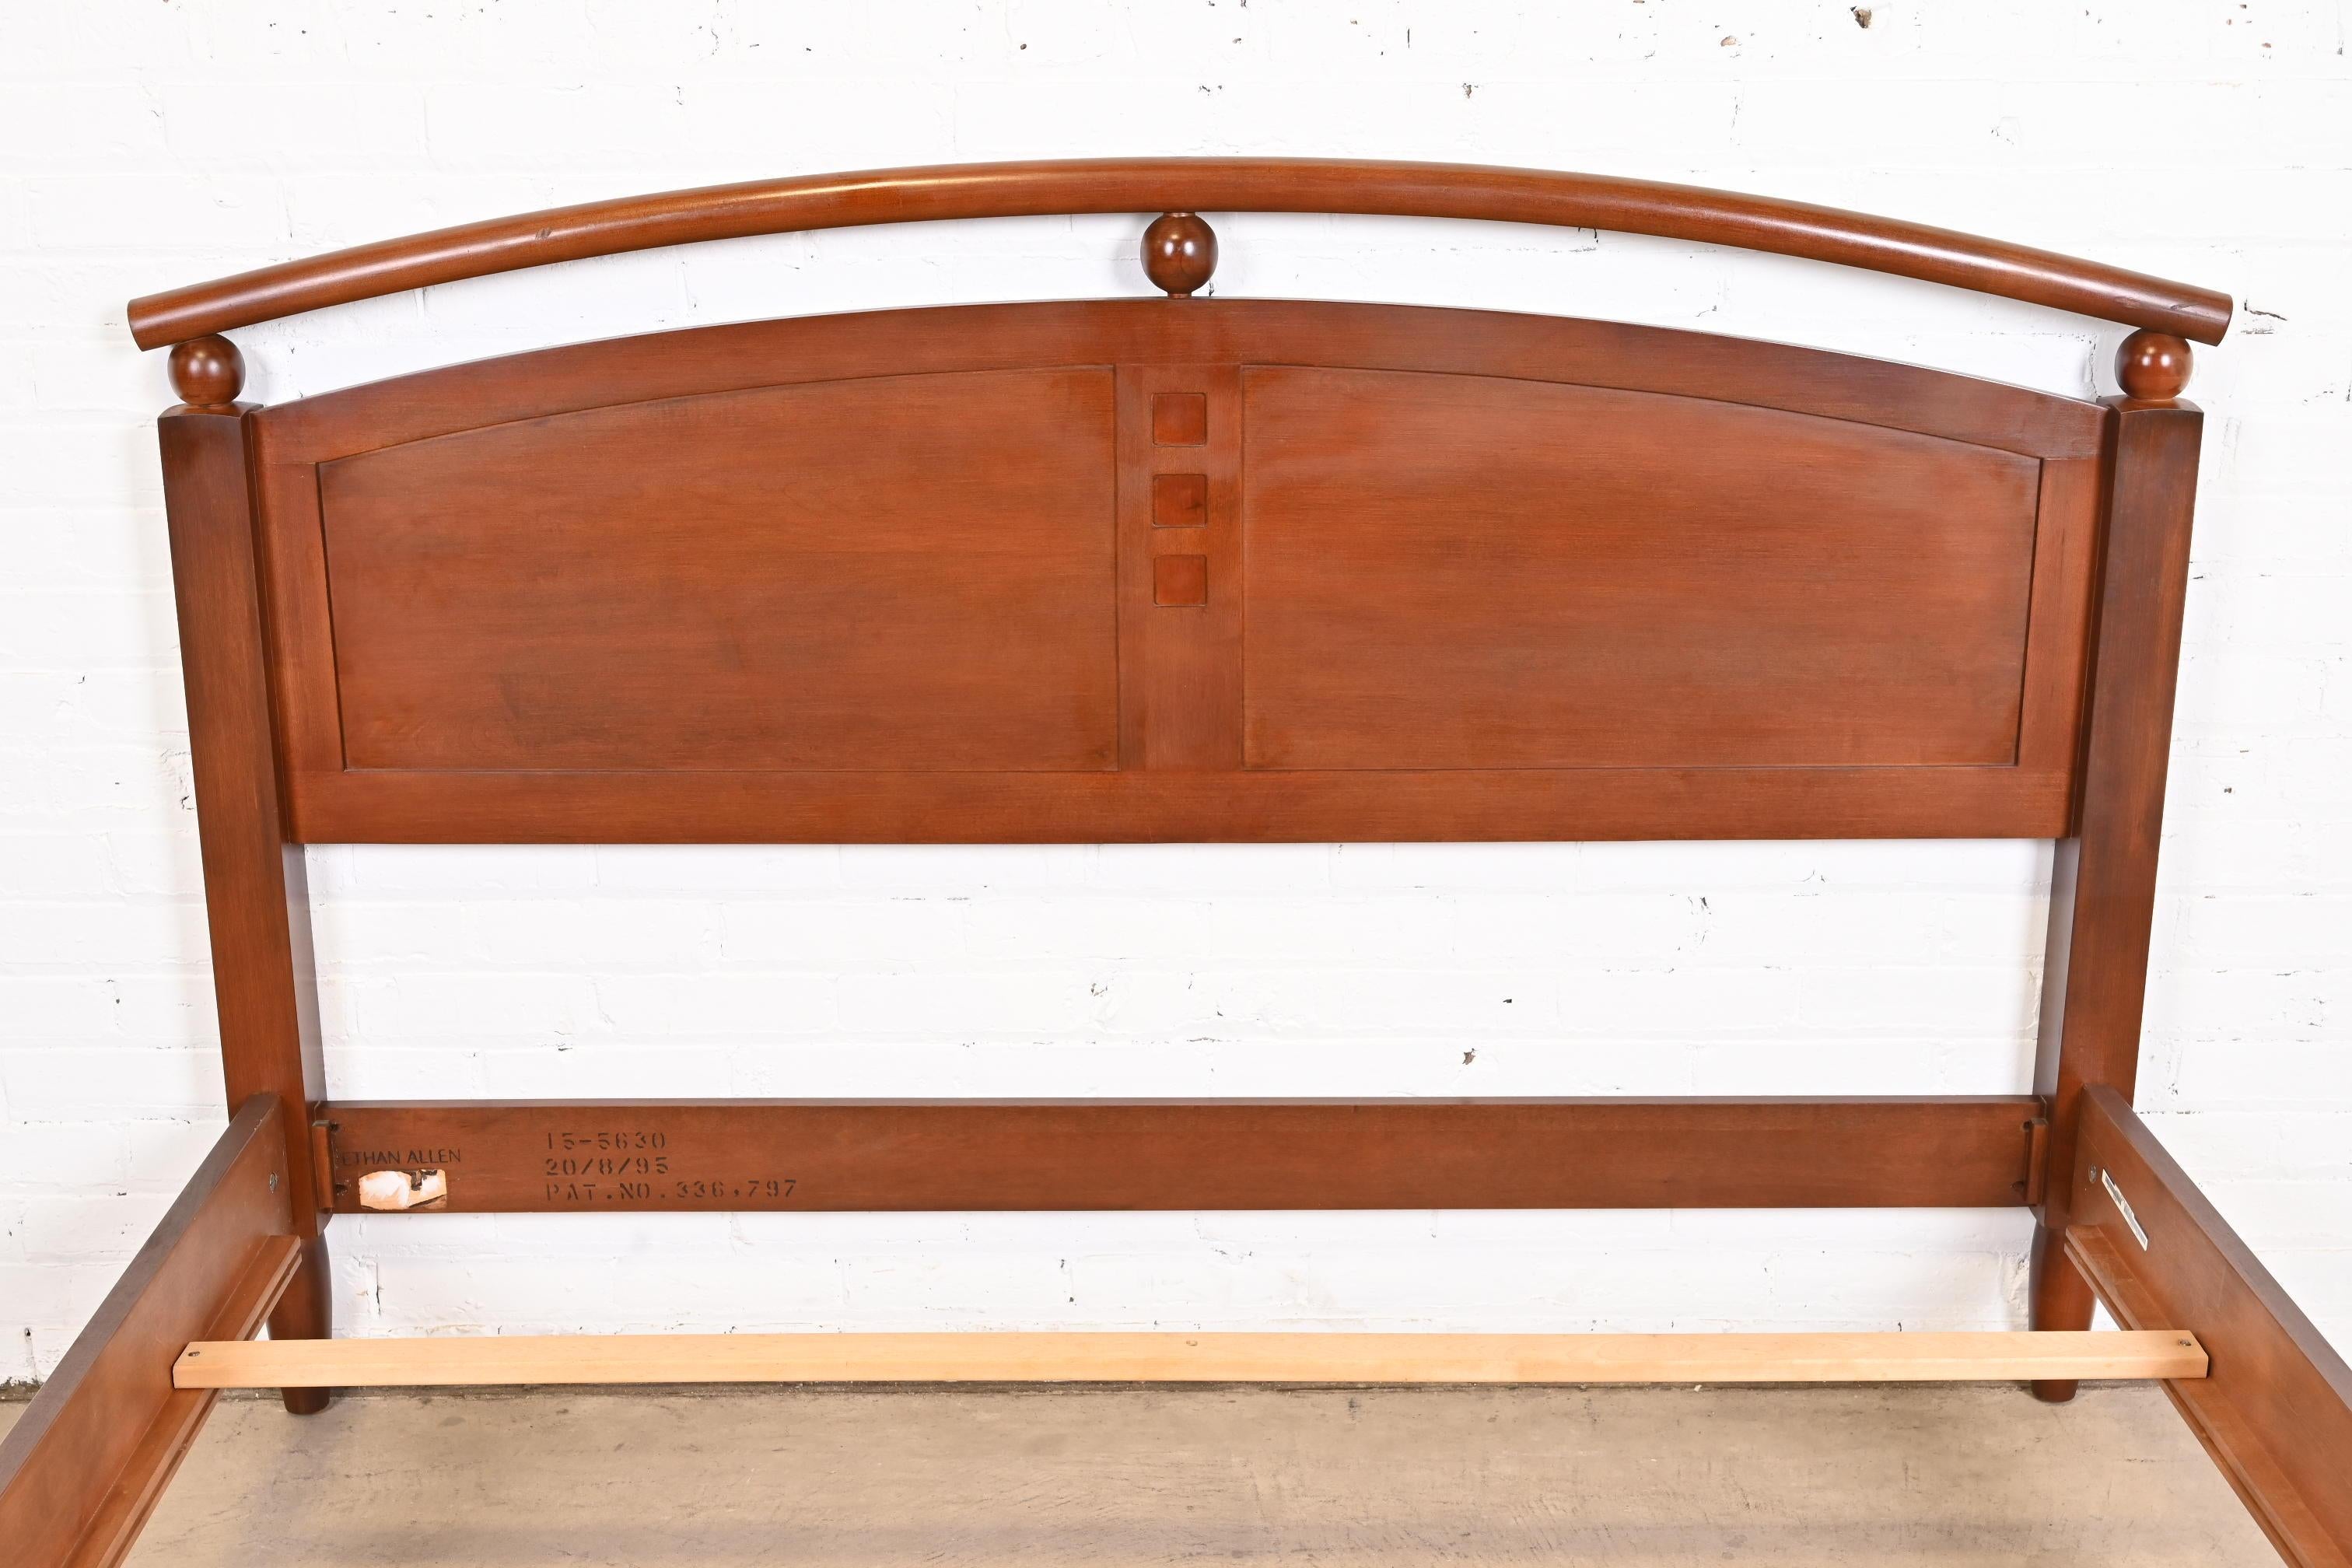 Ethan Allen American Dimensions Modern Cherry Wood Queen Size Bed 4